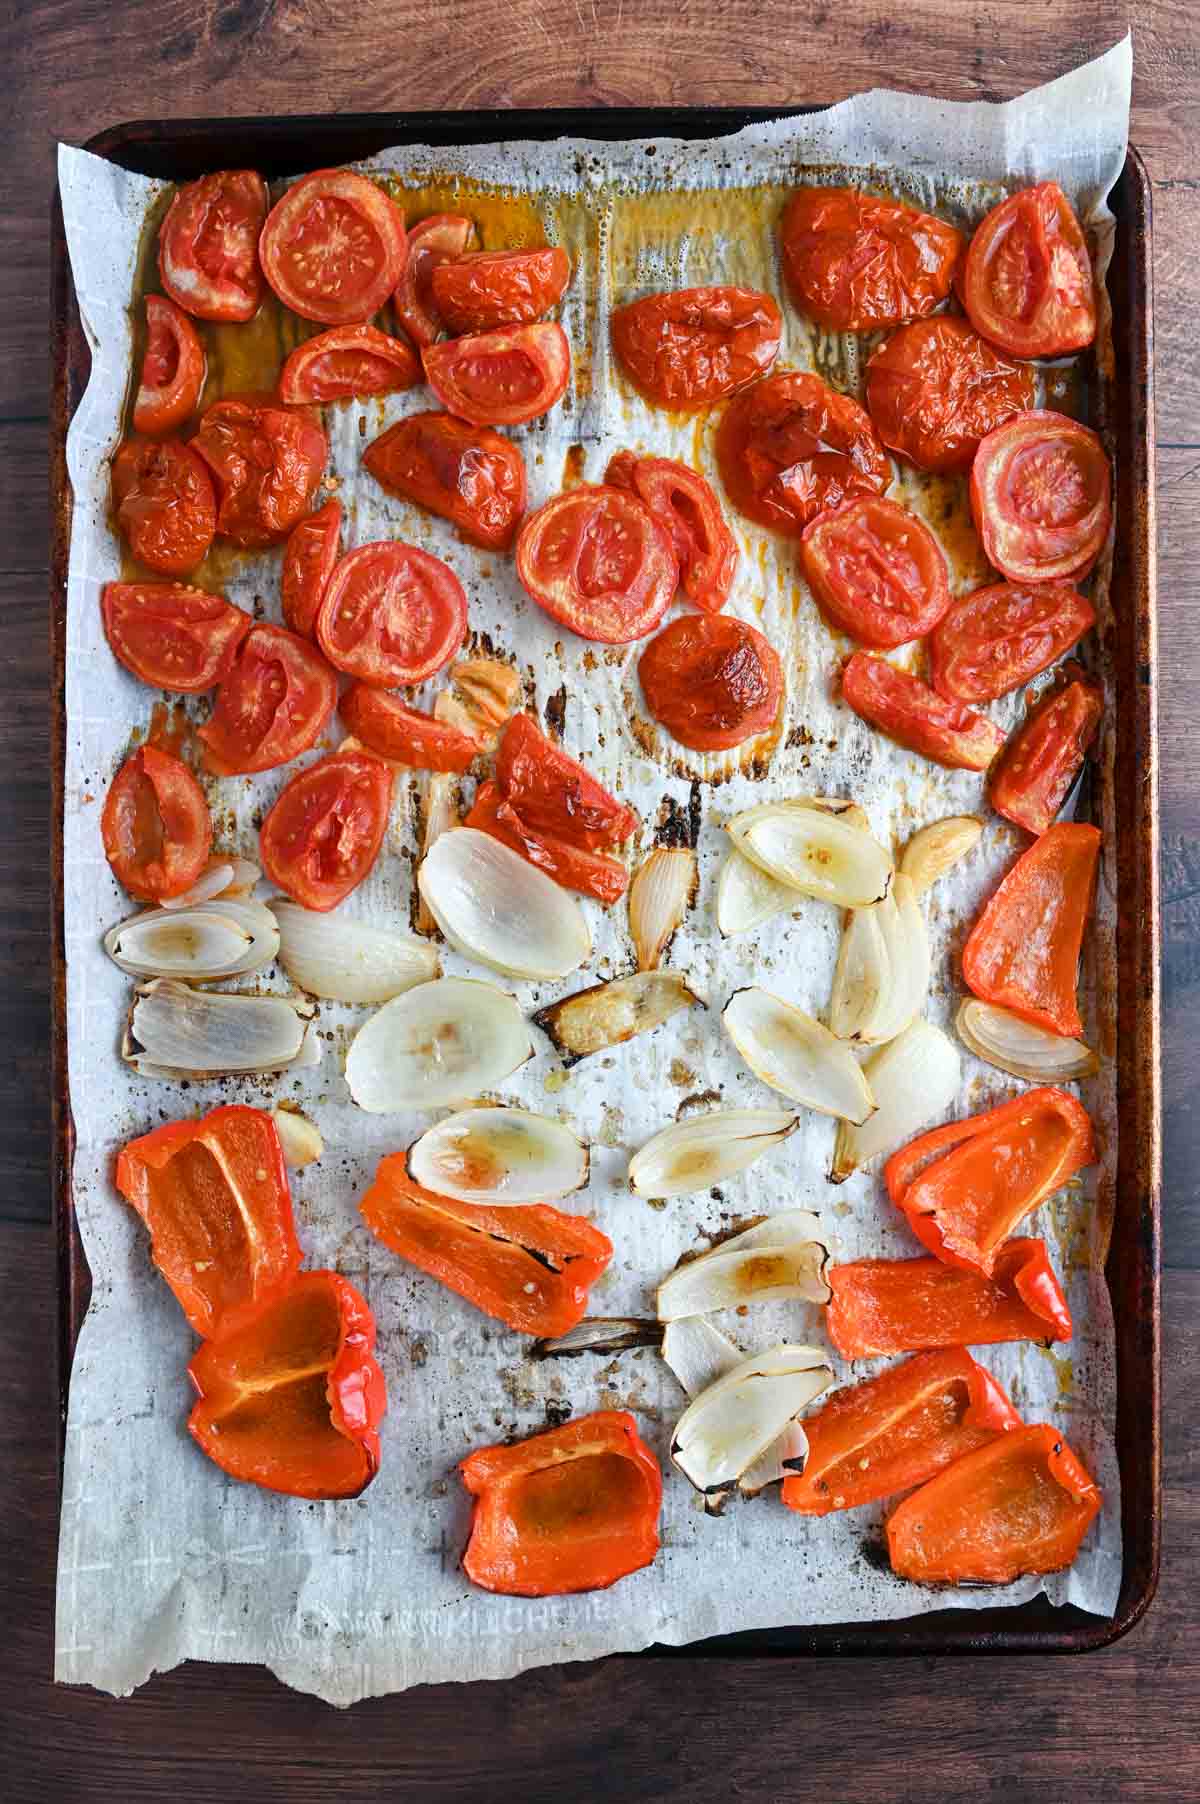 Roasted tomatoes, onions, and peppers on a sheet pan.